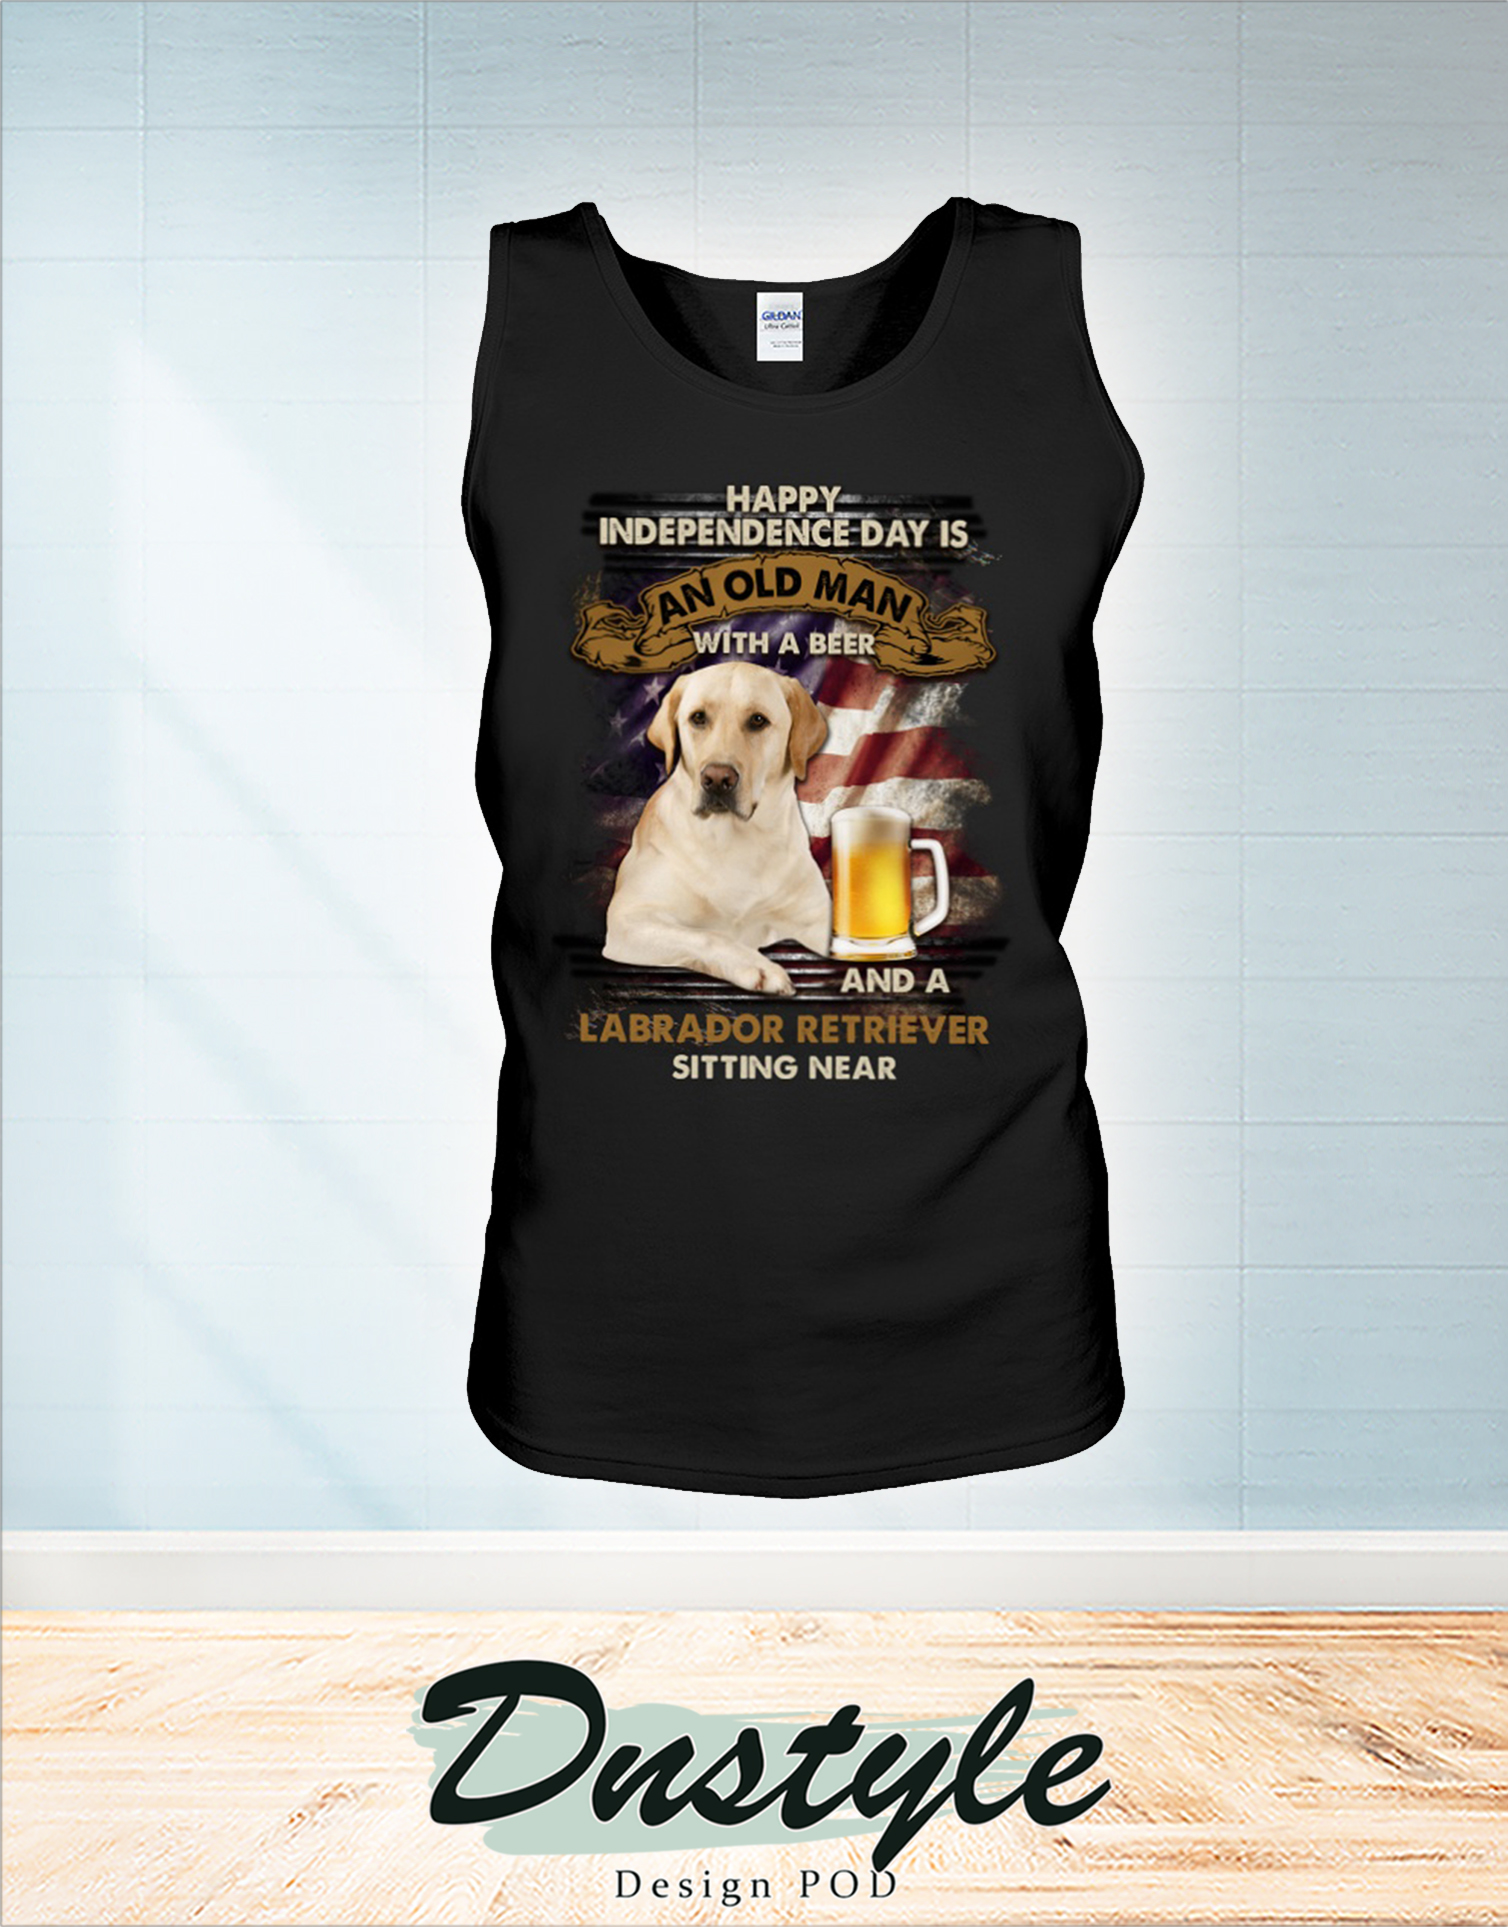 Happy independence day is an old man with a beer and a Labrador retriever sitting near tank